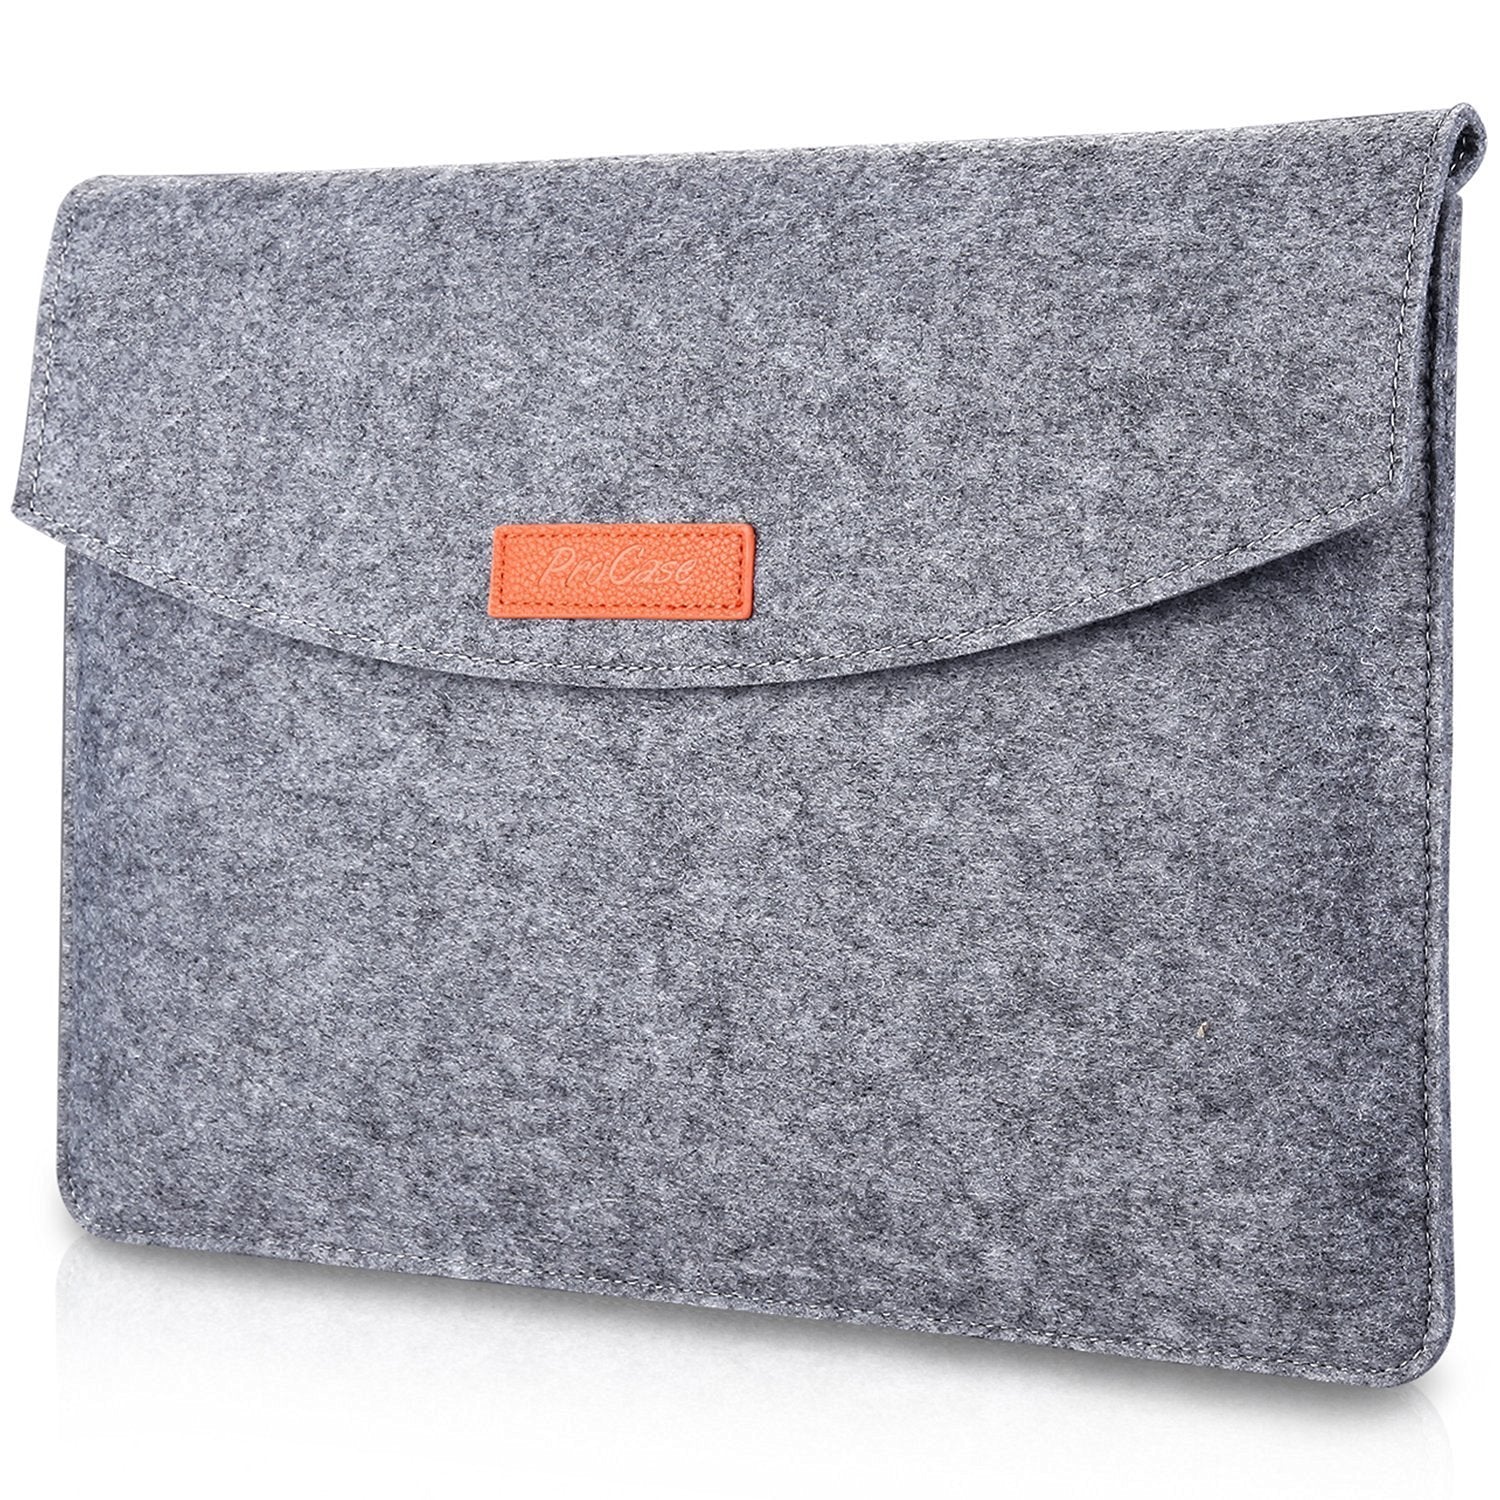 Tablet Laptop Sleeve Case Protective Carrying Bag | ProCase grey